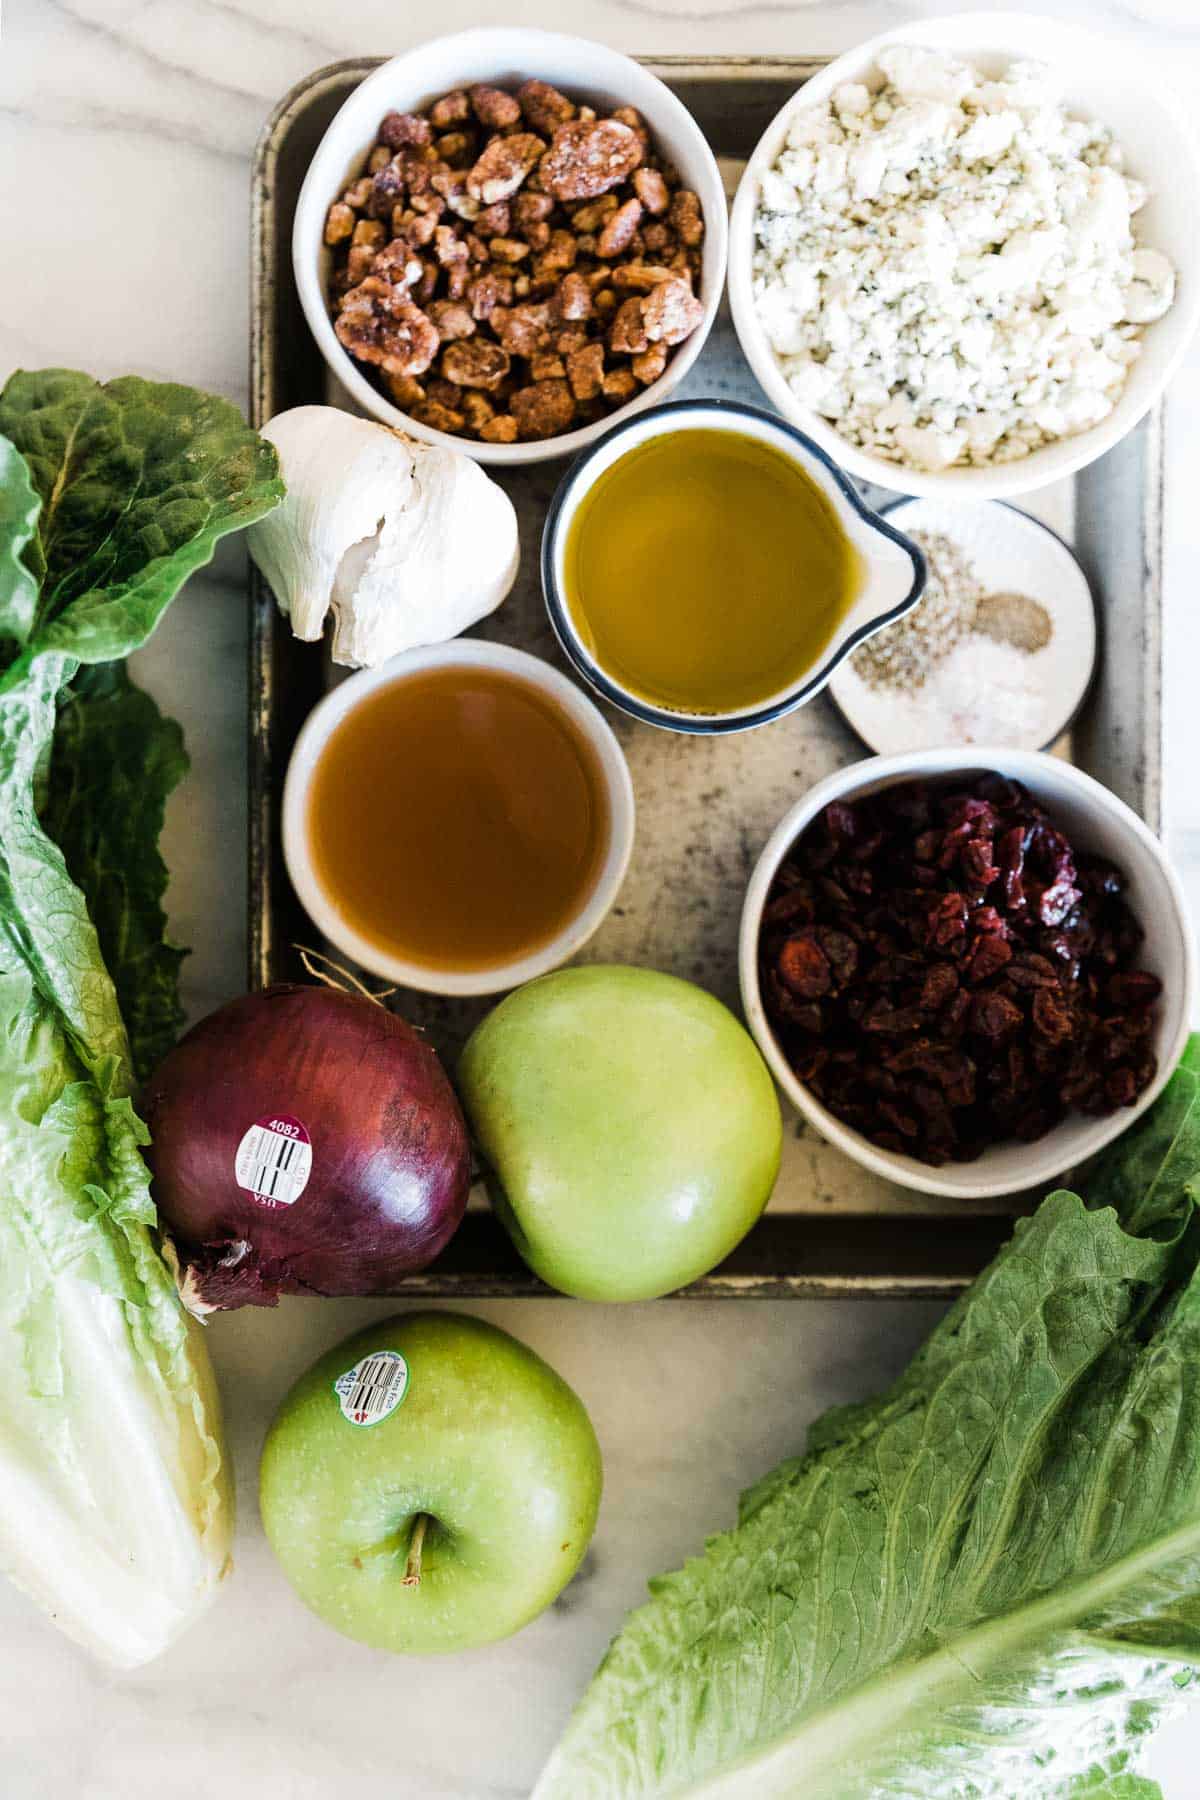 Ingredients to make apple gorgonzola salad on the table.